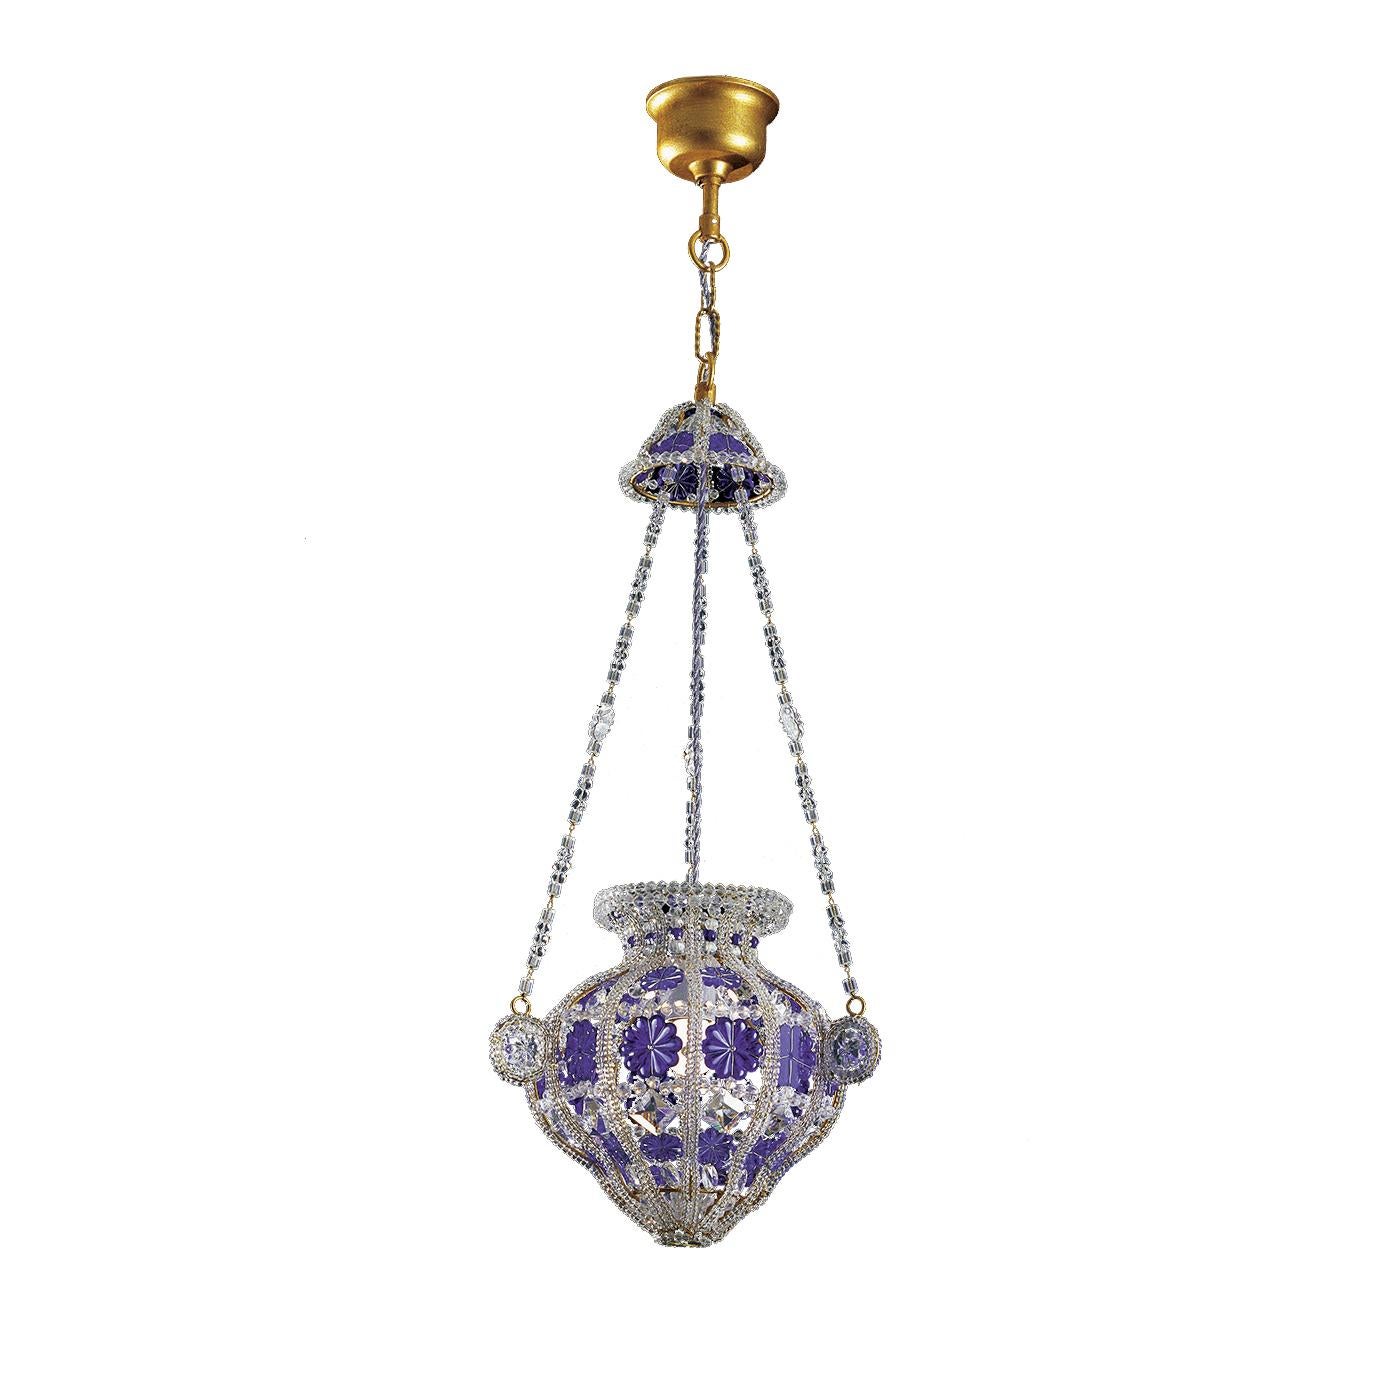 This magnificent chandelier will make a luxurious and sophisticated statement in a classic environment thanks to its elegant design and exquisite craftsmanship. Its structure in forged iron is adorned with clear and blue Bohemian crystals. These